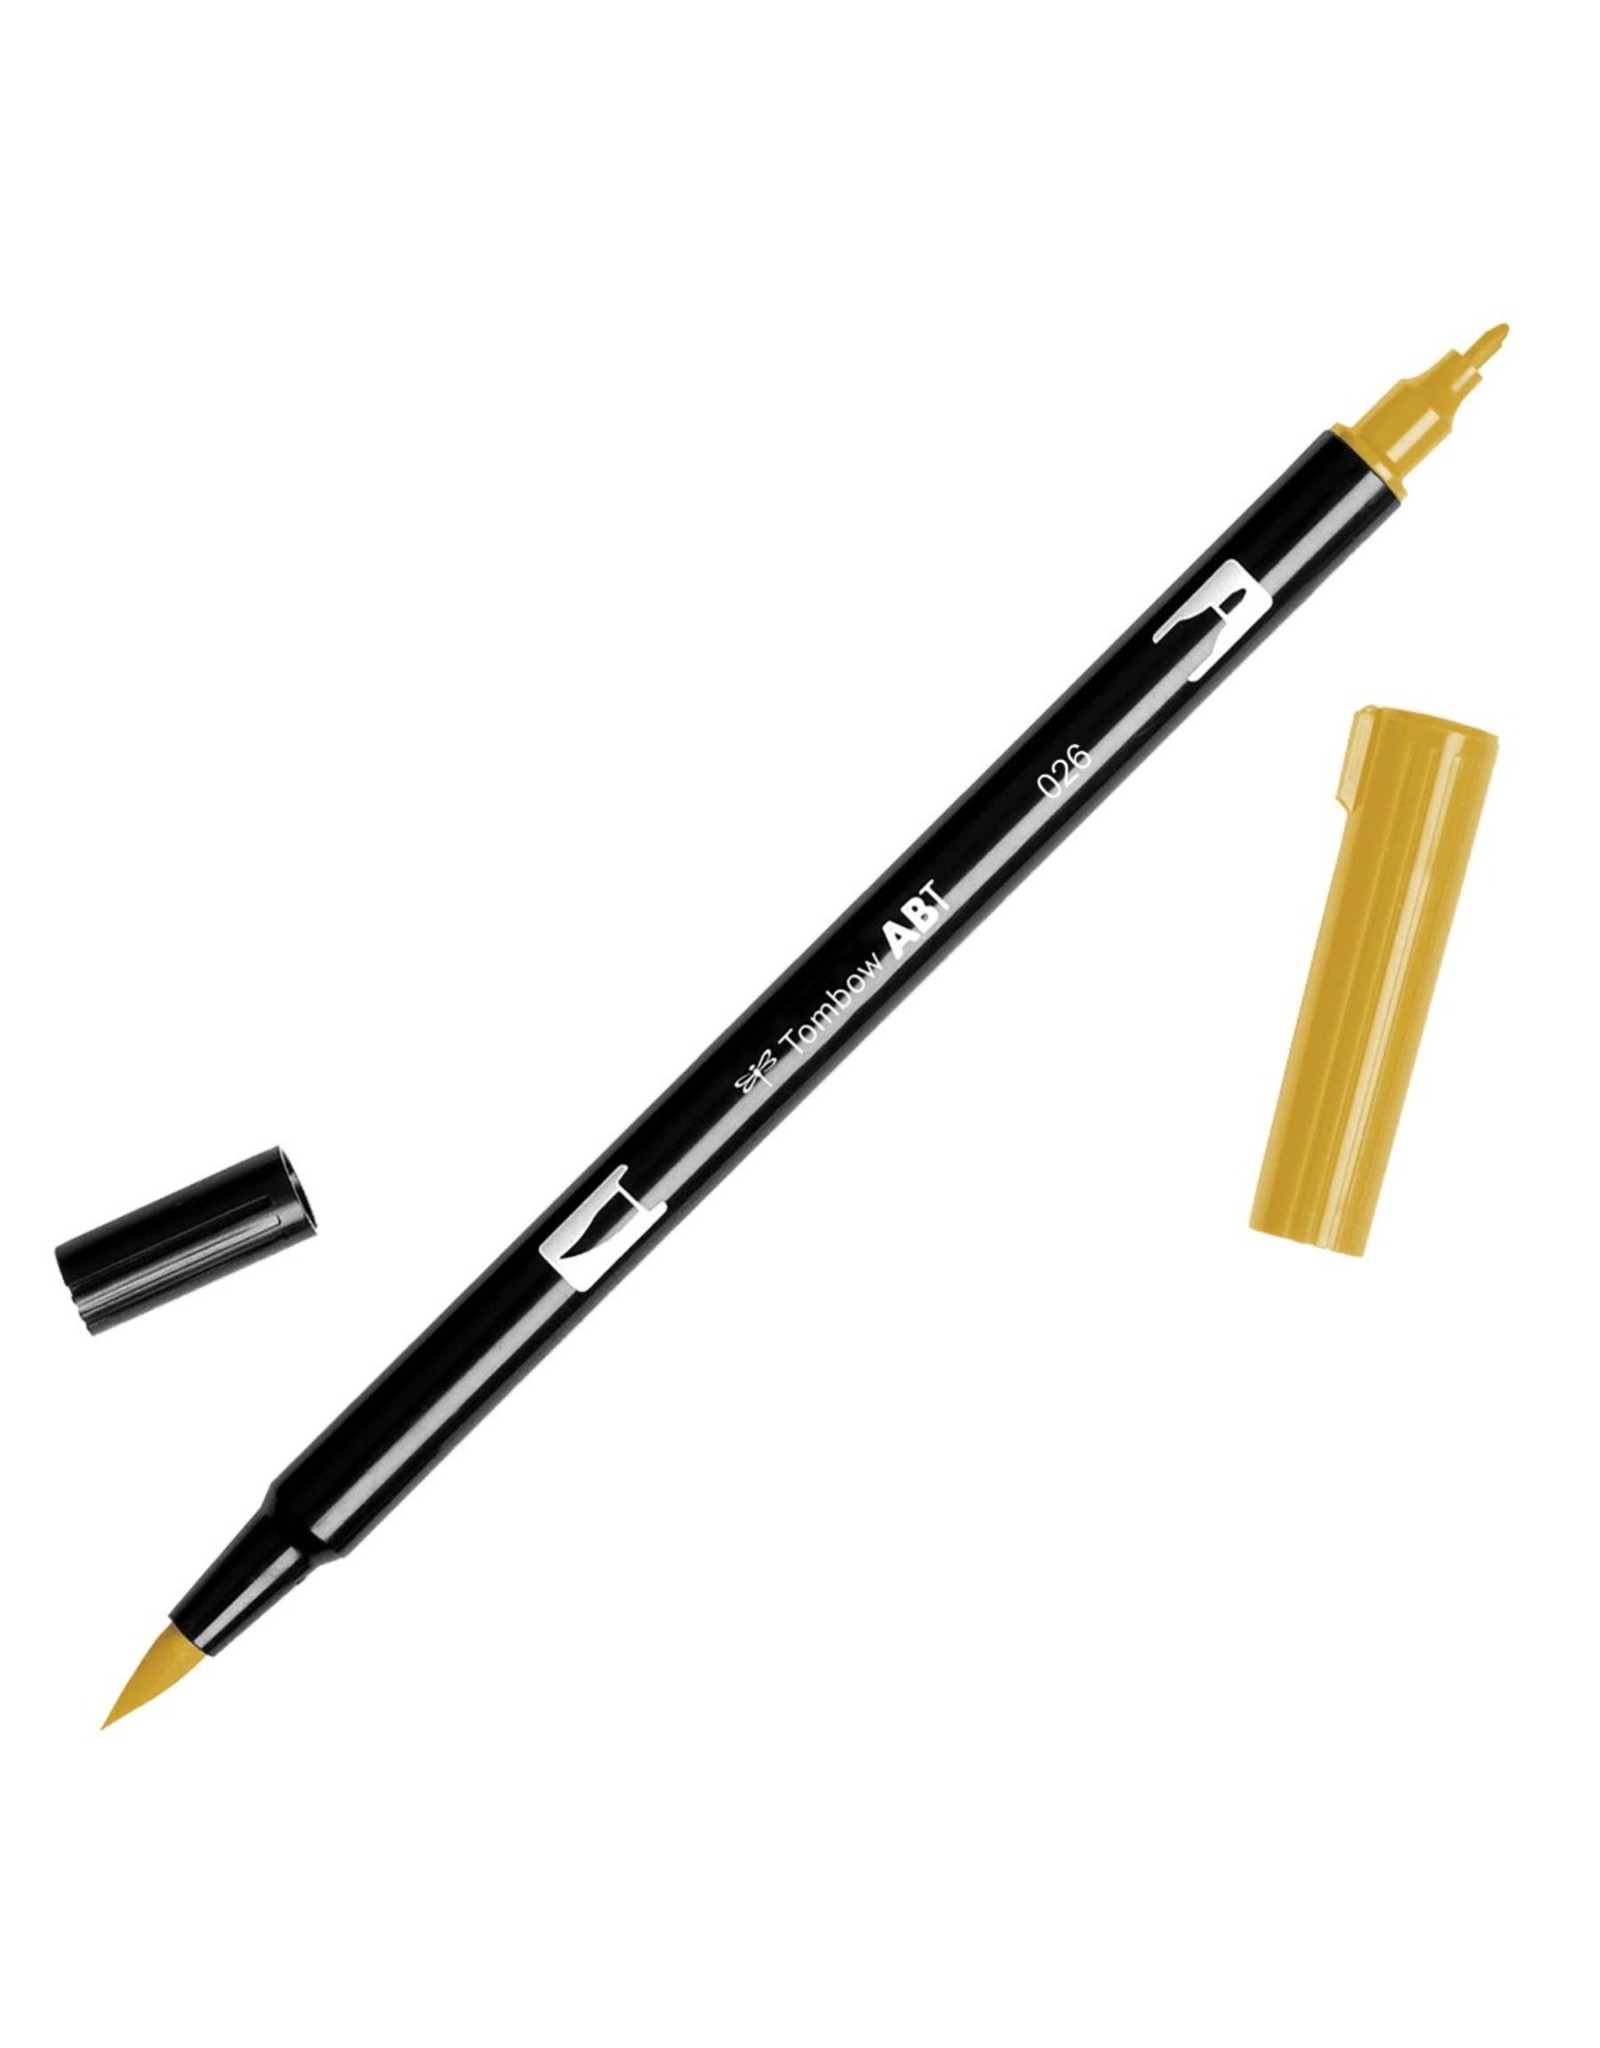 TOMBOW TOMBOW ABT-026 YELLOW GOLD DUAL BRUSH MARKER